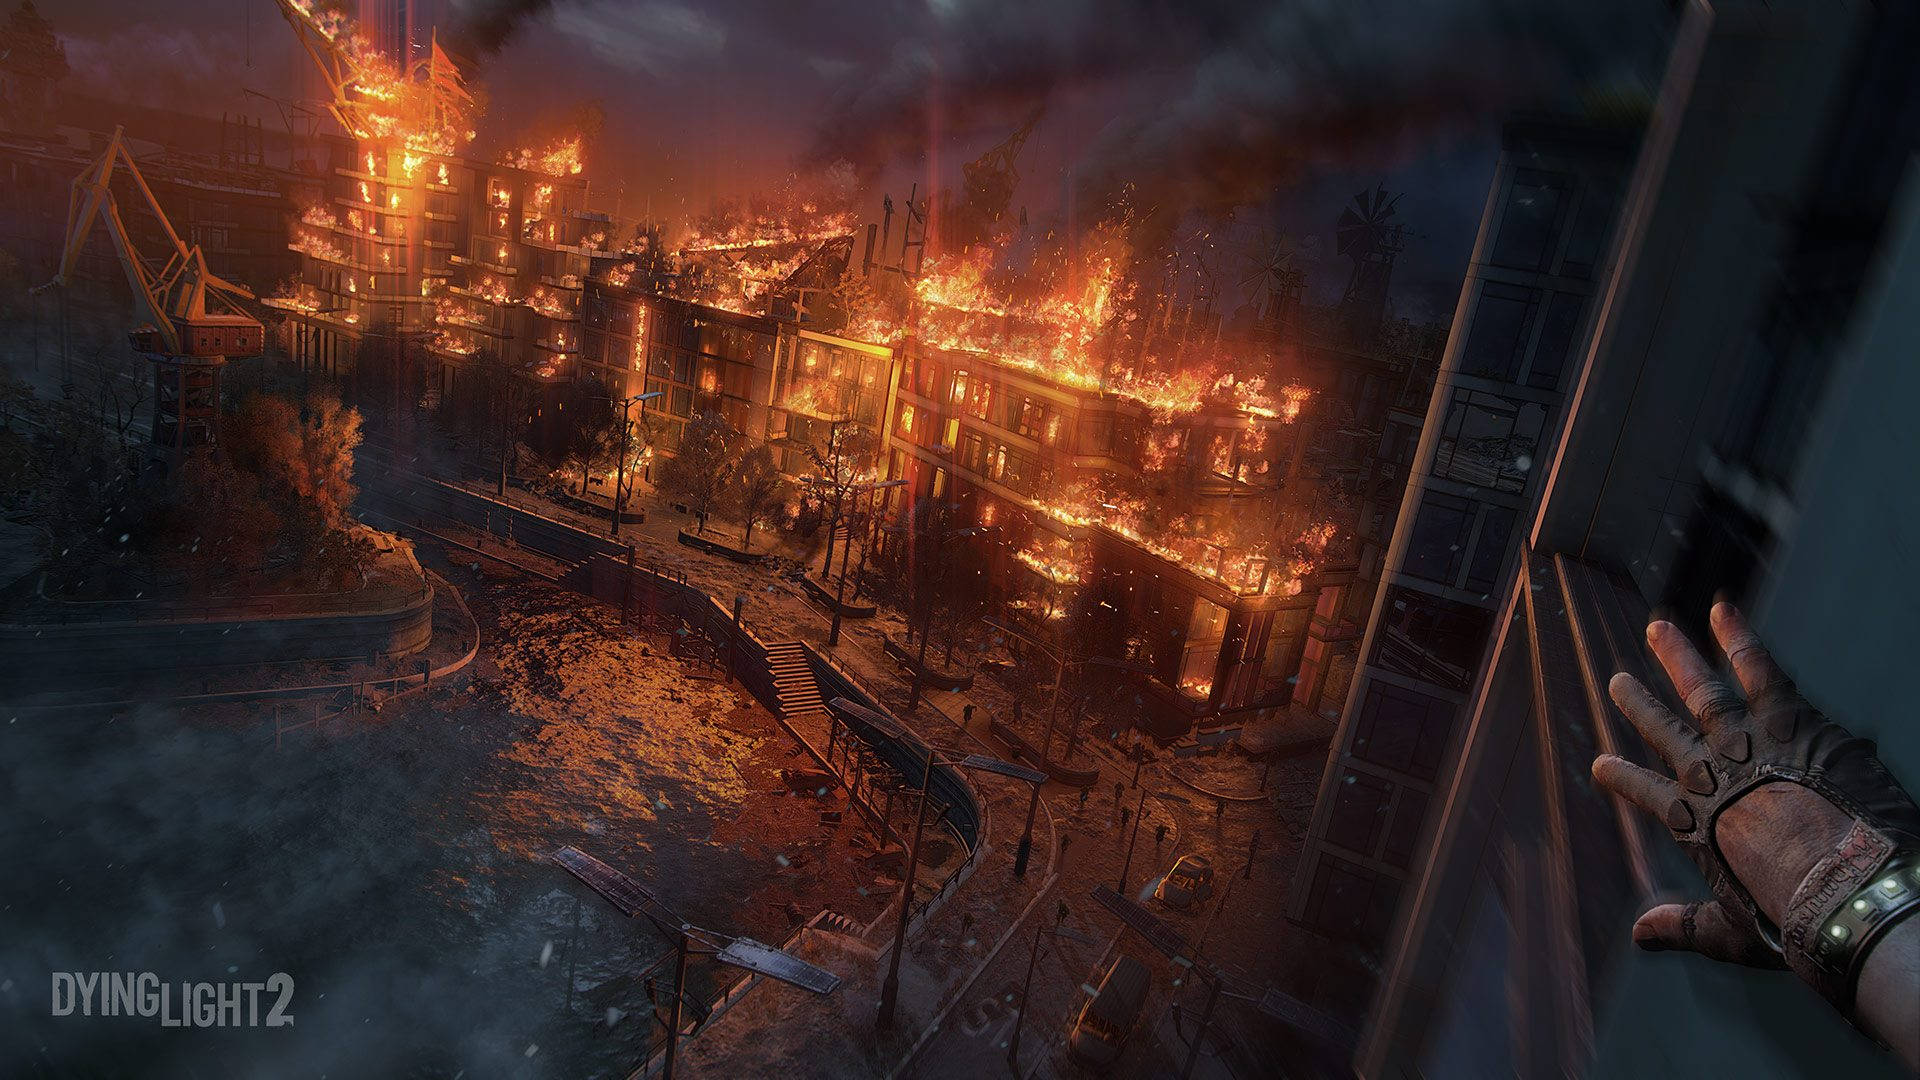 Dying Light 2: Stunning Image of a Burning City Wallpaper